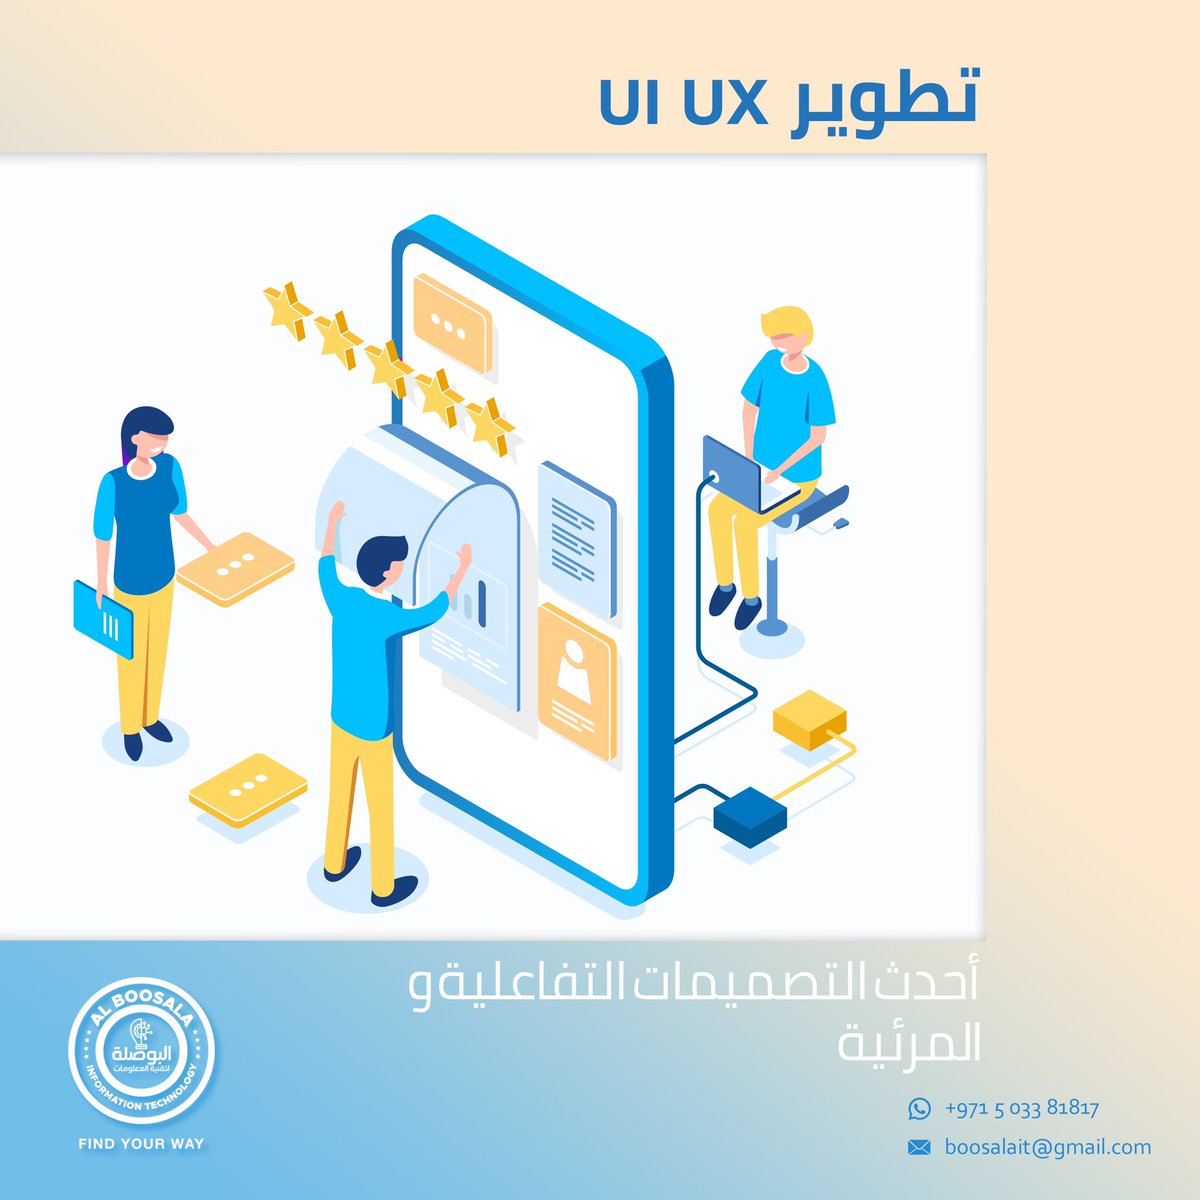 State of art Design. Our design engineers prestigiously work on each aspect of UI & UX designs to bring the best out of each.

Contact us today for a free Consultation! 0503381817
__
#boosalatech
__
#Dubai #abudhabi #uae🇦🇪 #appdevelopment #uiux #uidesign #uxdesign #uaedesign